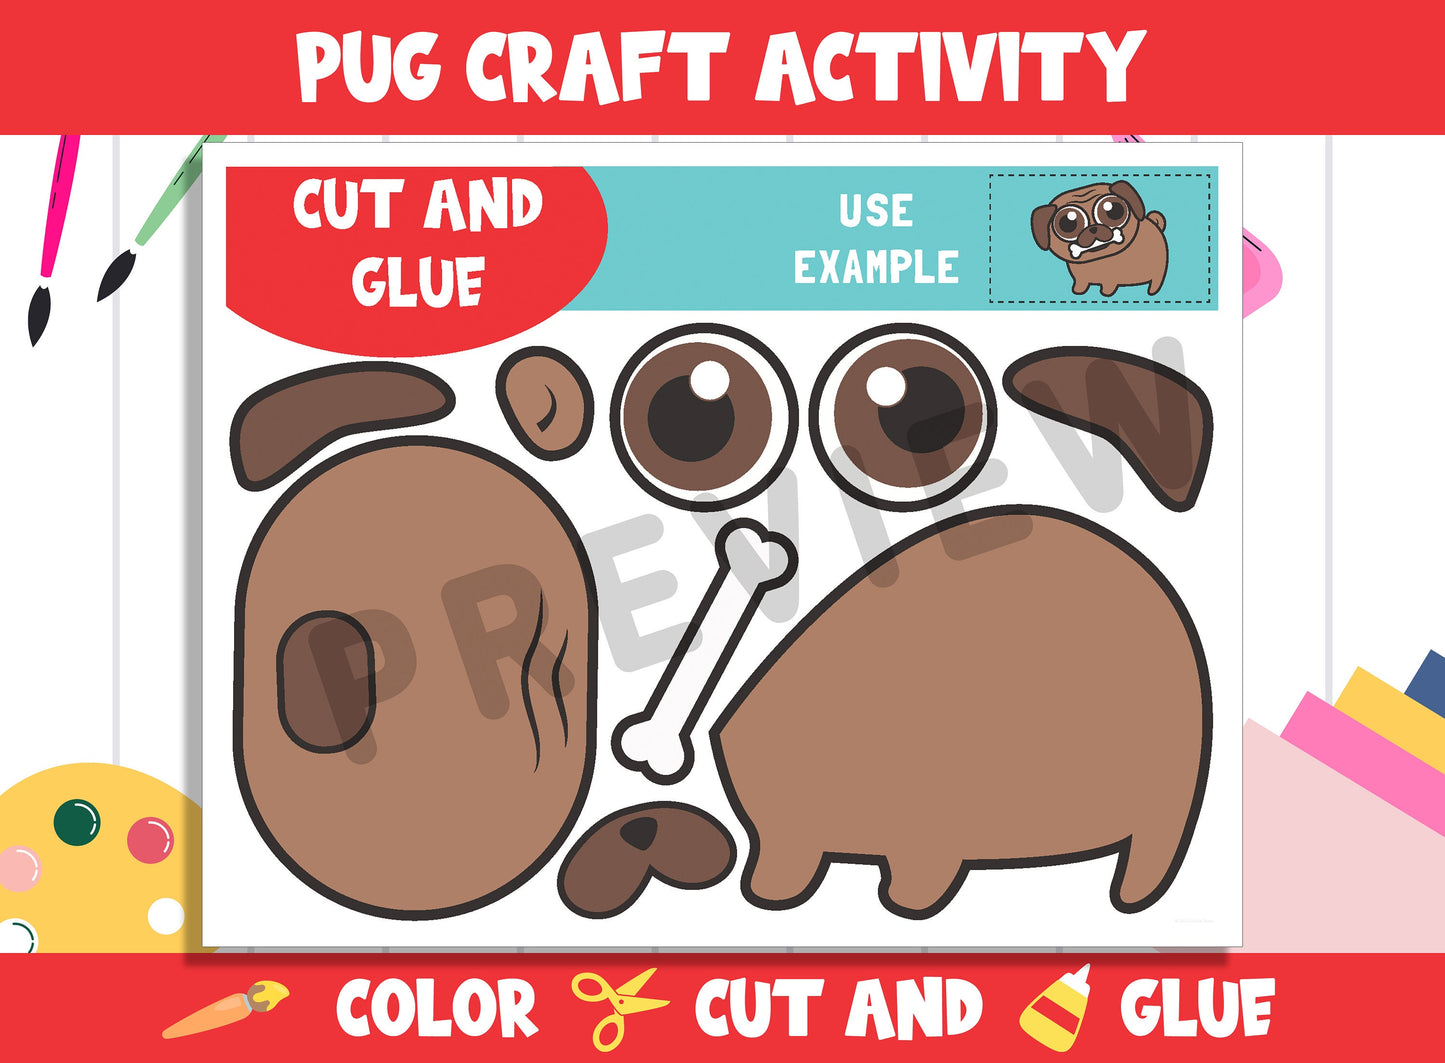 Cute Pug/Dog Craft Activity - Color, Cut, and Glue for PreK to 2nd Grade, PDF File, Instant Download